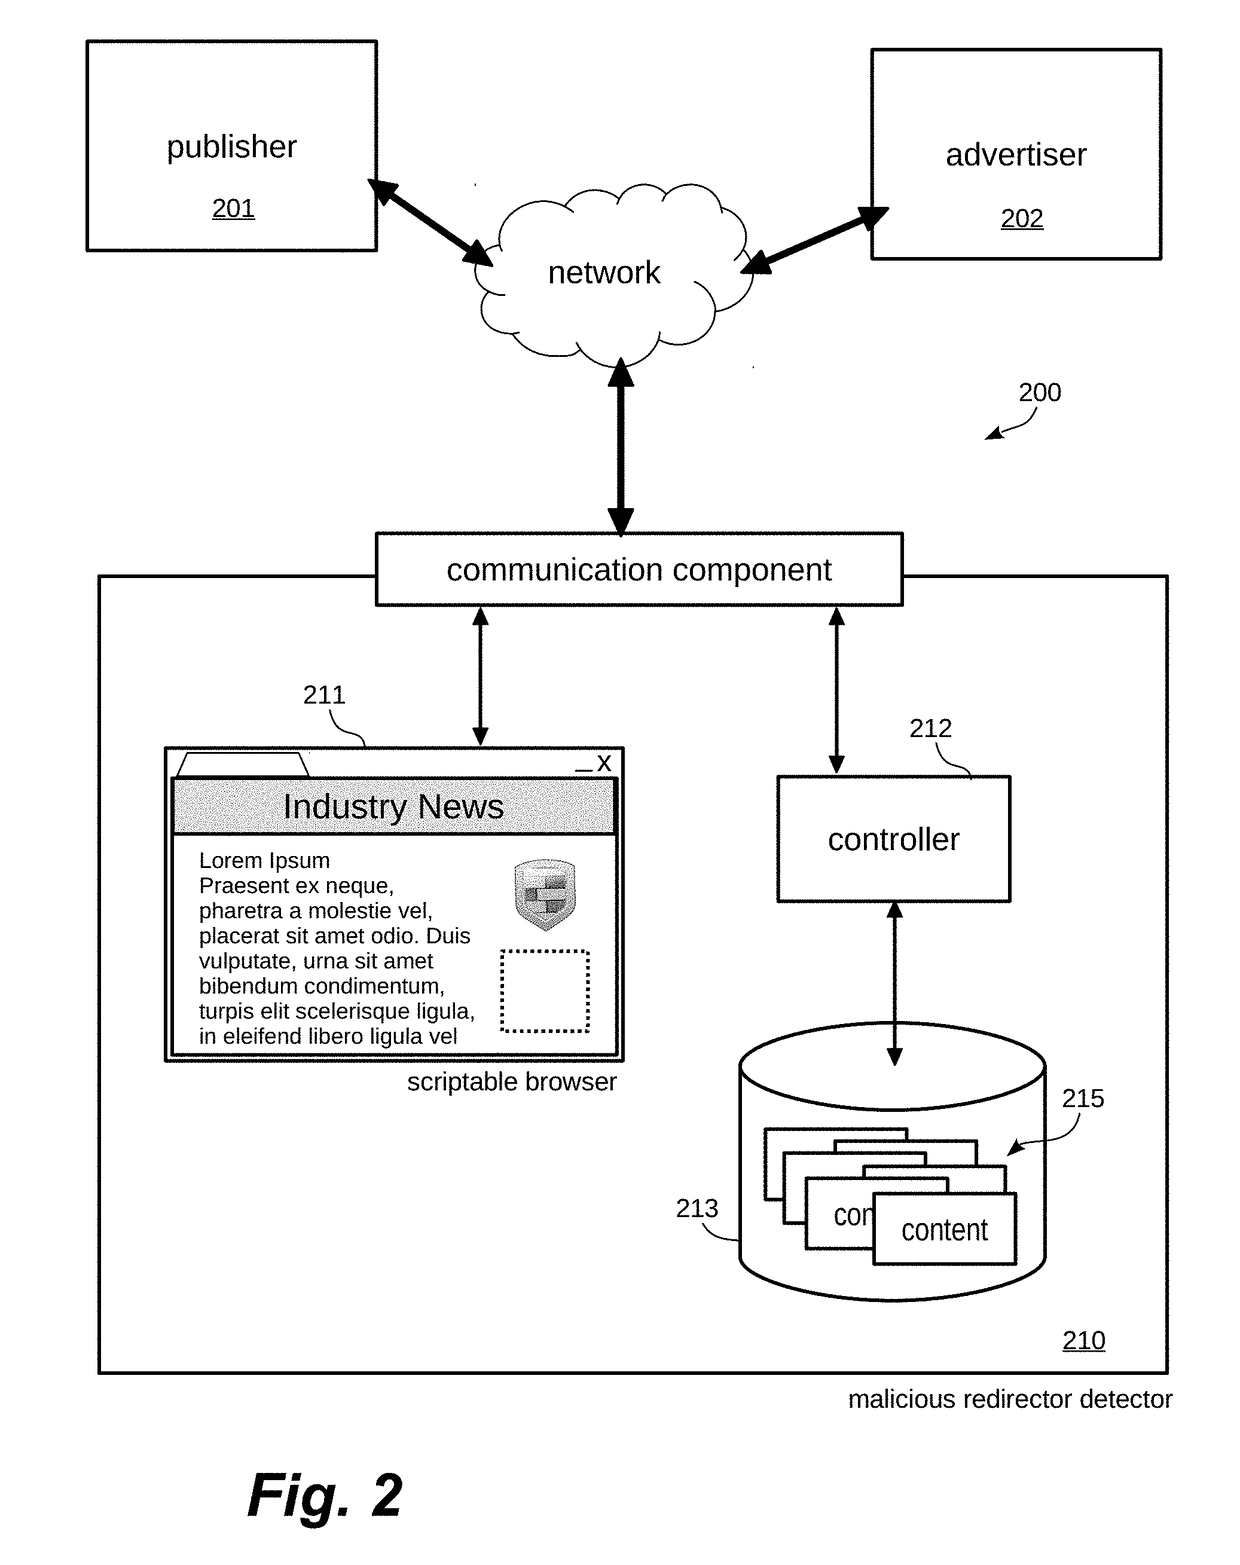 Detecting and attributing undesirable automatic redirects